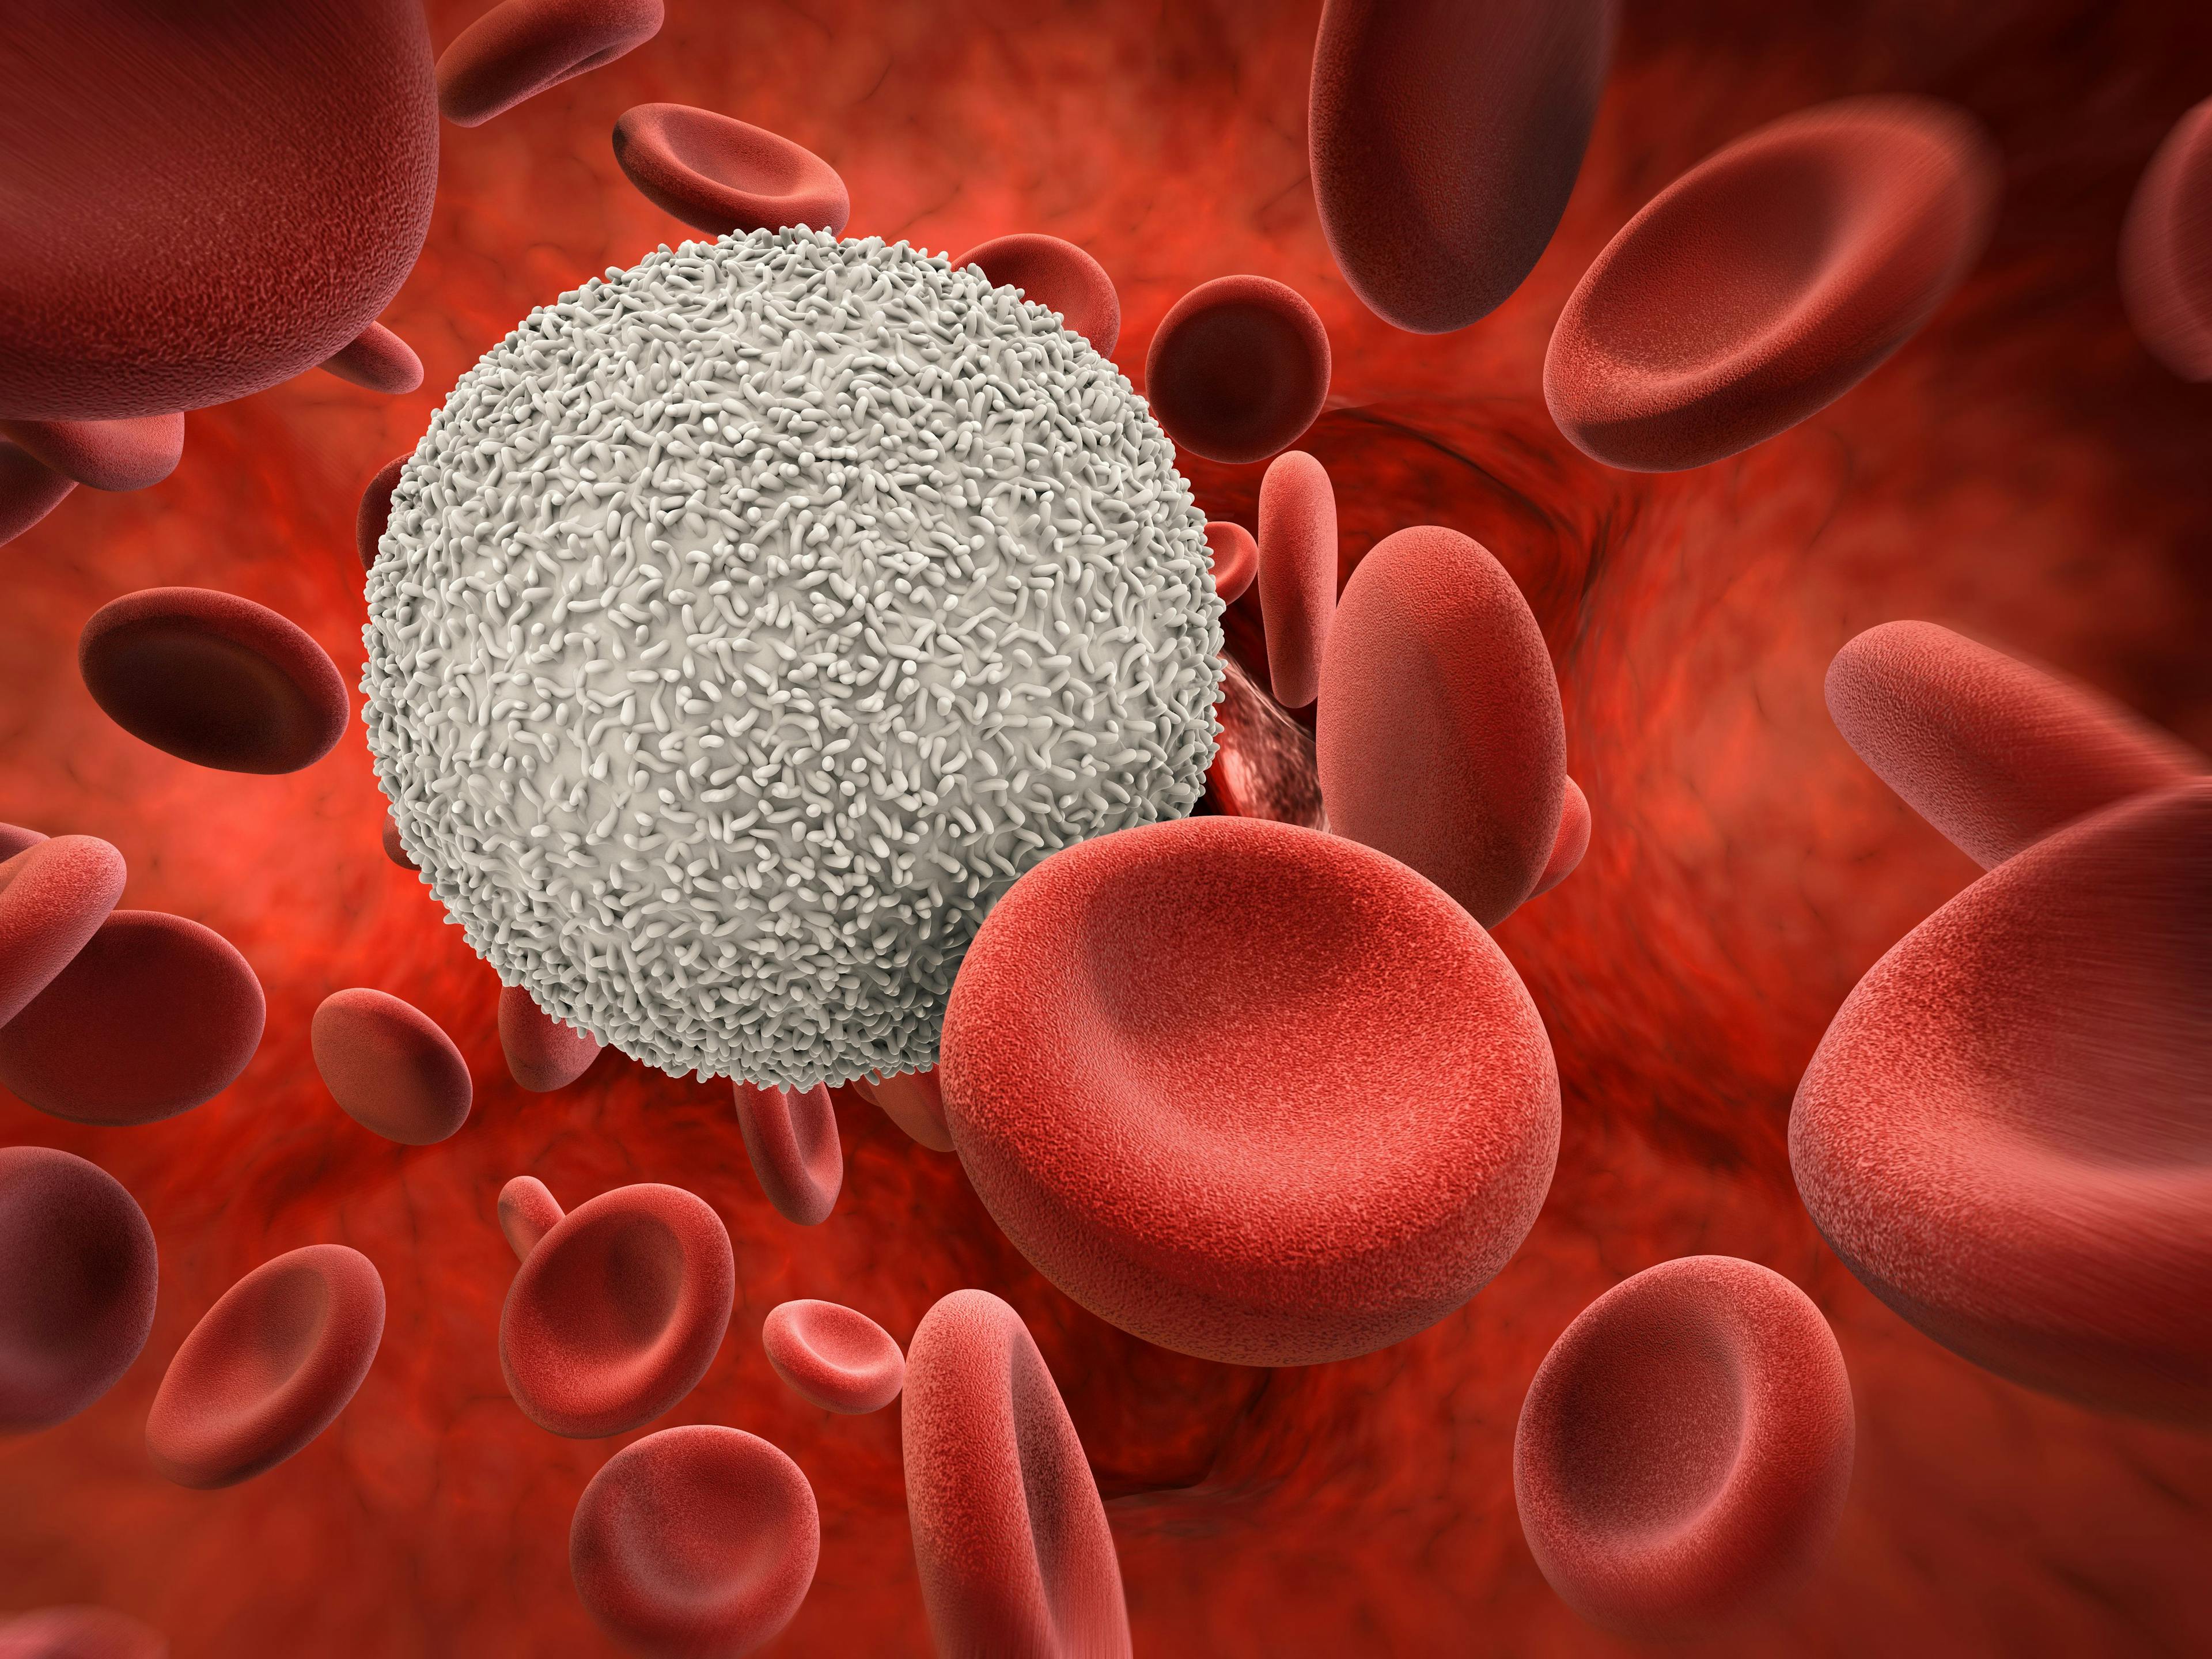 The combination of MRD-guided ibrutinib and venetoclax demonstrated feasibility for treating patients with relapsed/refractory chronic lymphocytic leukemia.